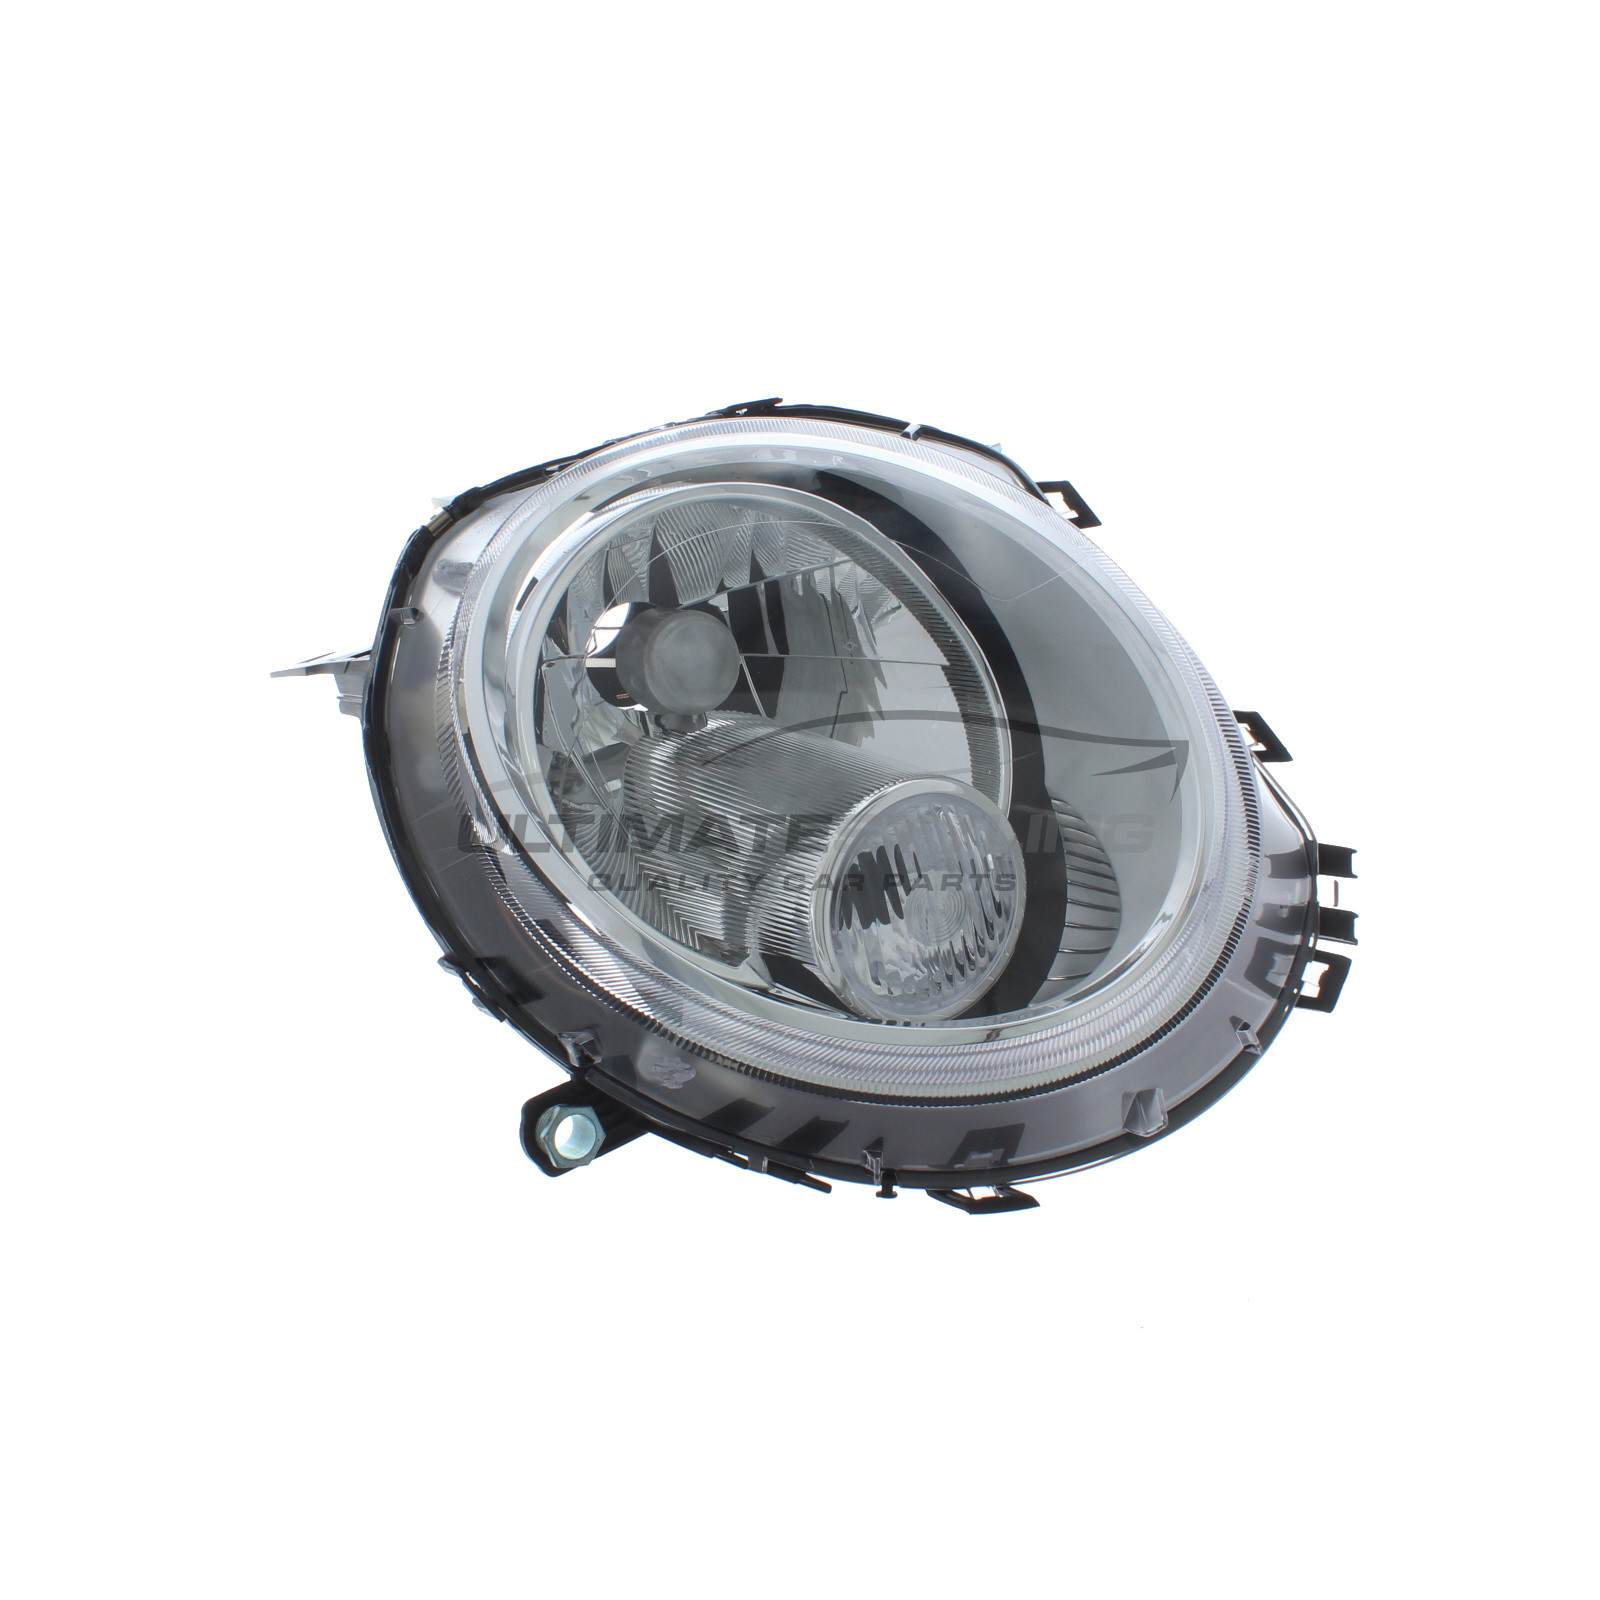 Mini 2006-2014 Halogen, Electric With Motor, Chrome Headlight / Headlamp Including Clear Indicator Drivers Side (RH)